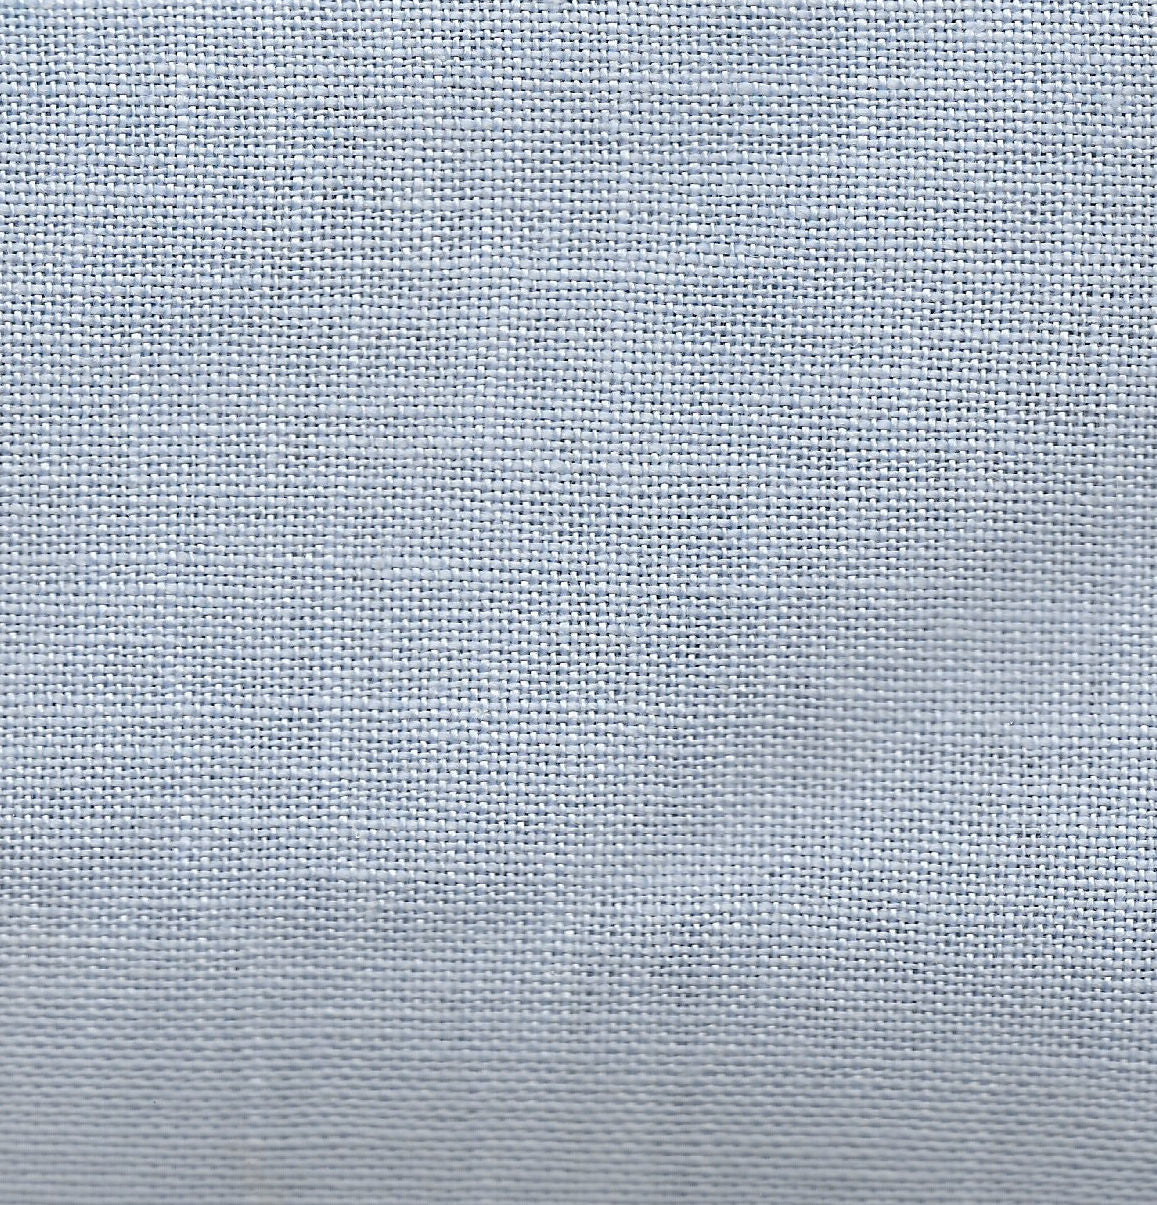 30 ct Linen - Stormy Blue (73" wide) -  $0.0439 / sq in